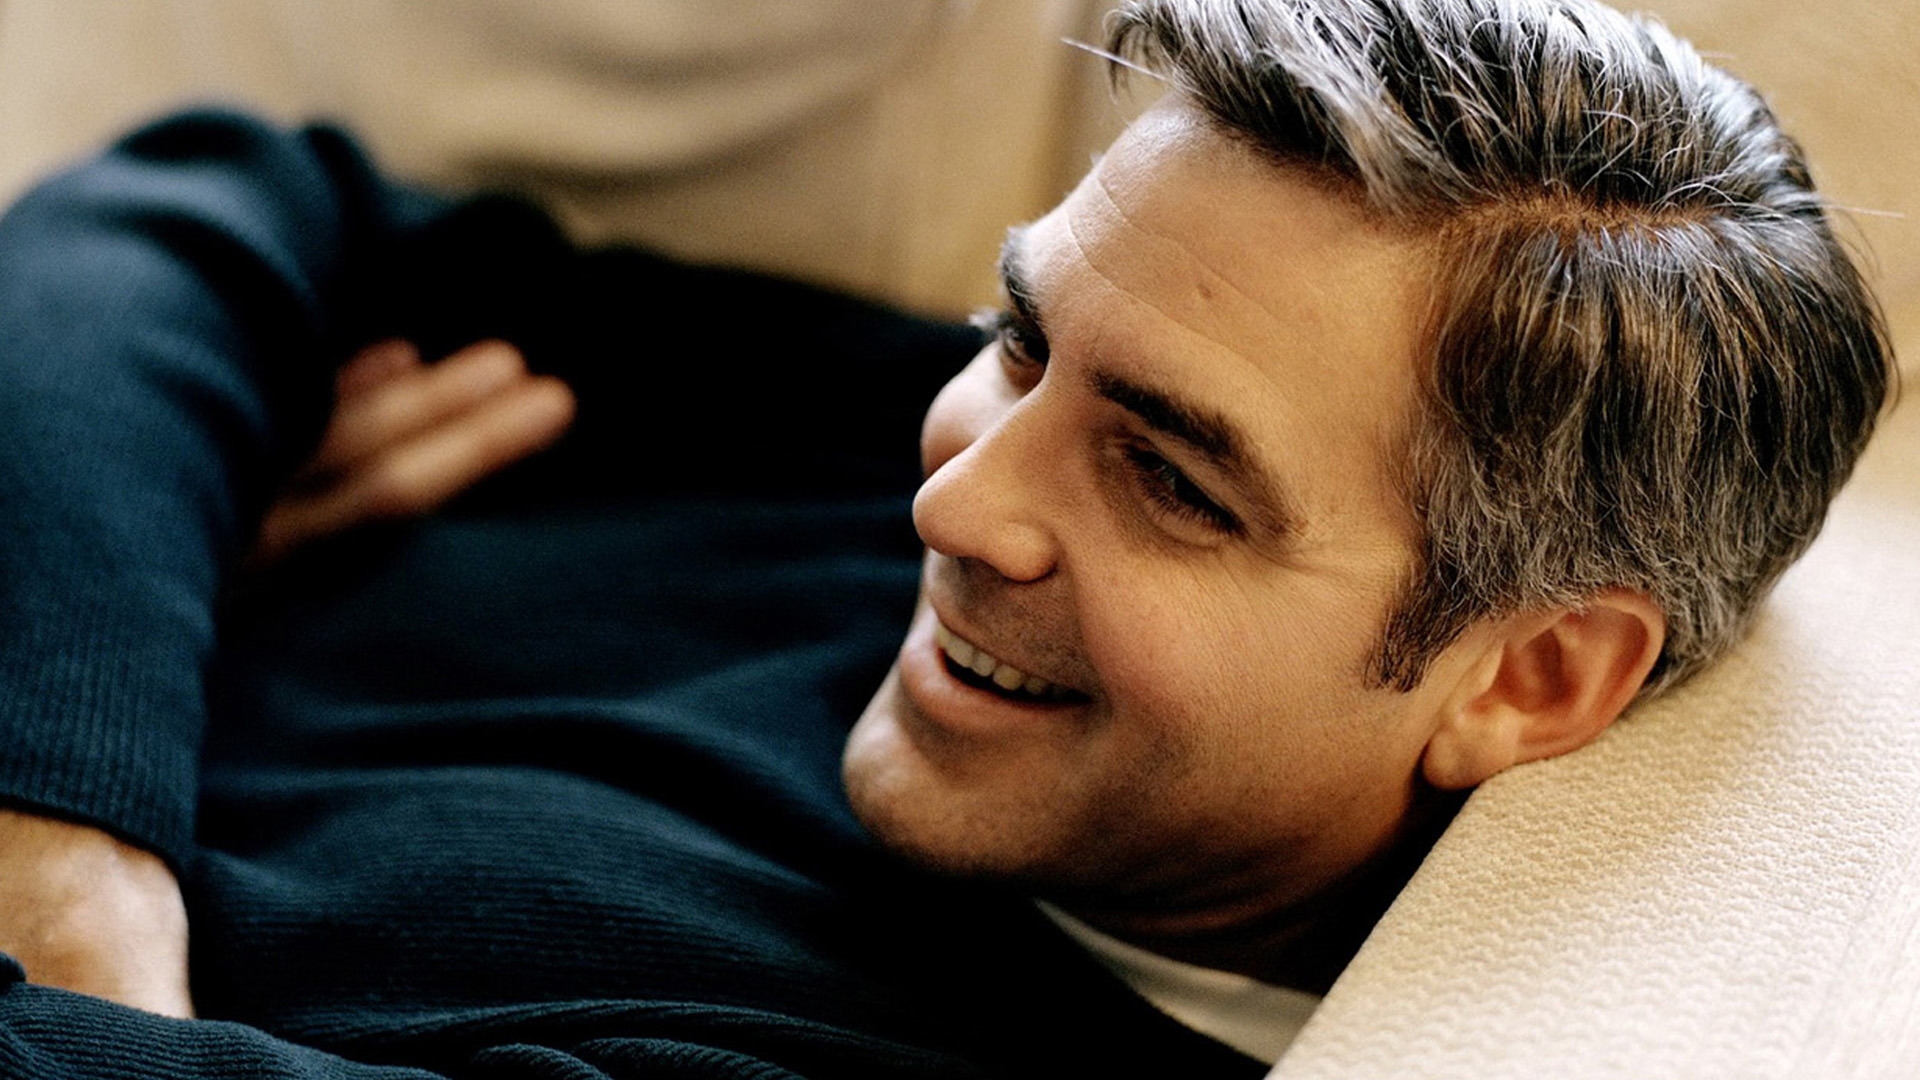 sweater smiling lying down george clooney actor Wallpapers